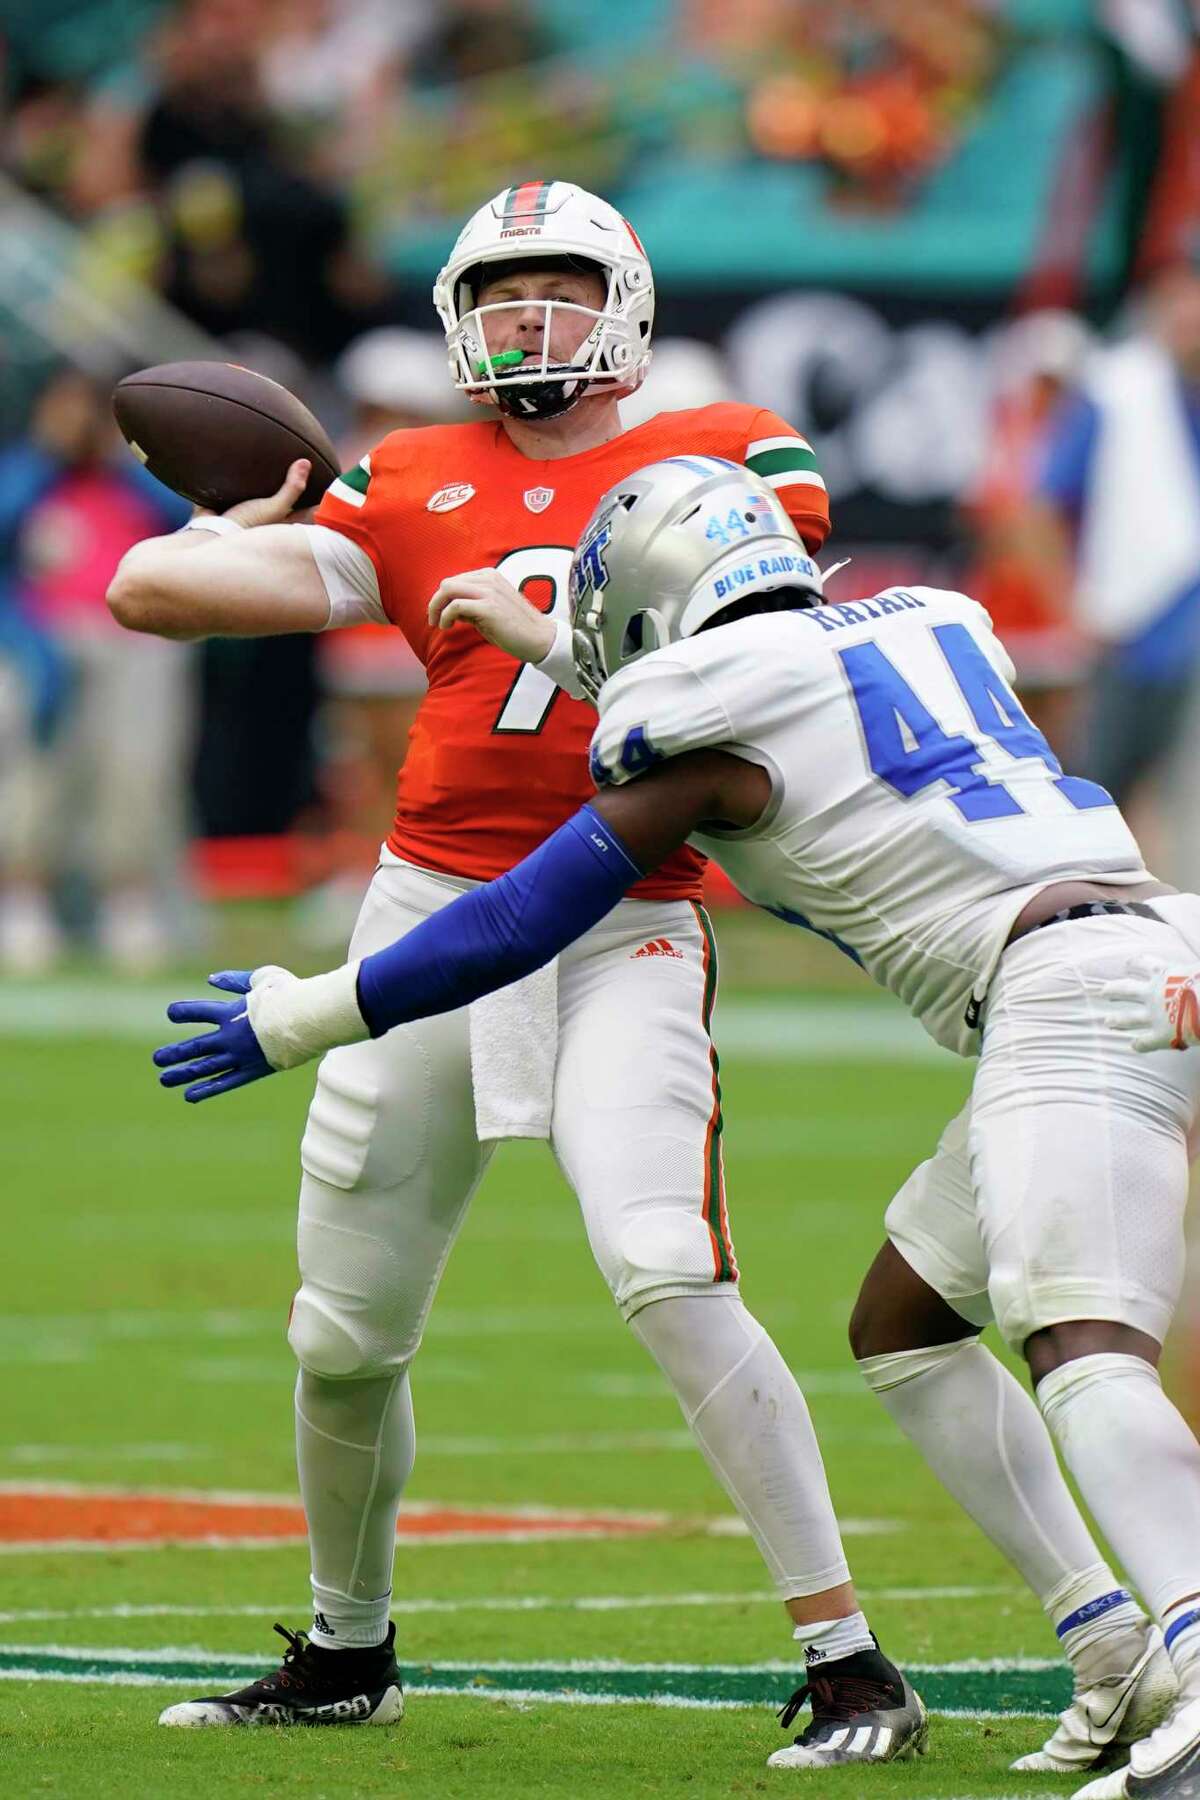 Middle Tennessee linebacker Jalen Rayam (44) rushes Miami quarterback Tyler Van Dyke (9) as he passes during the first half of an NCAA college football game, Saturday, Sept. 24, 2022, in Miami Gardens, Fla.